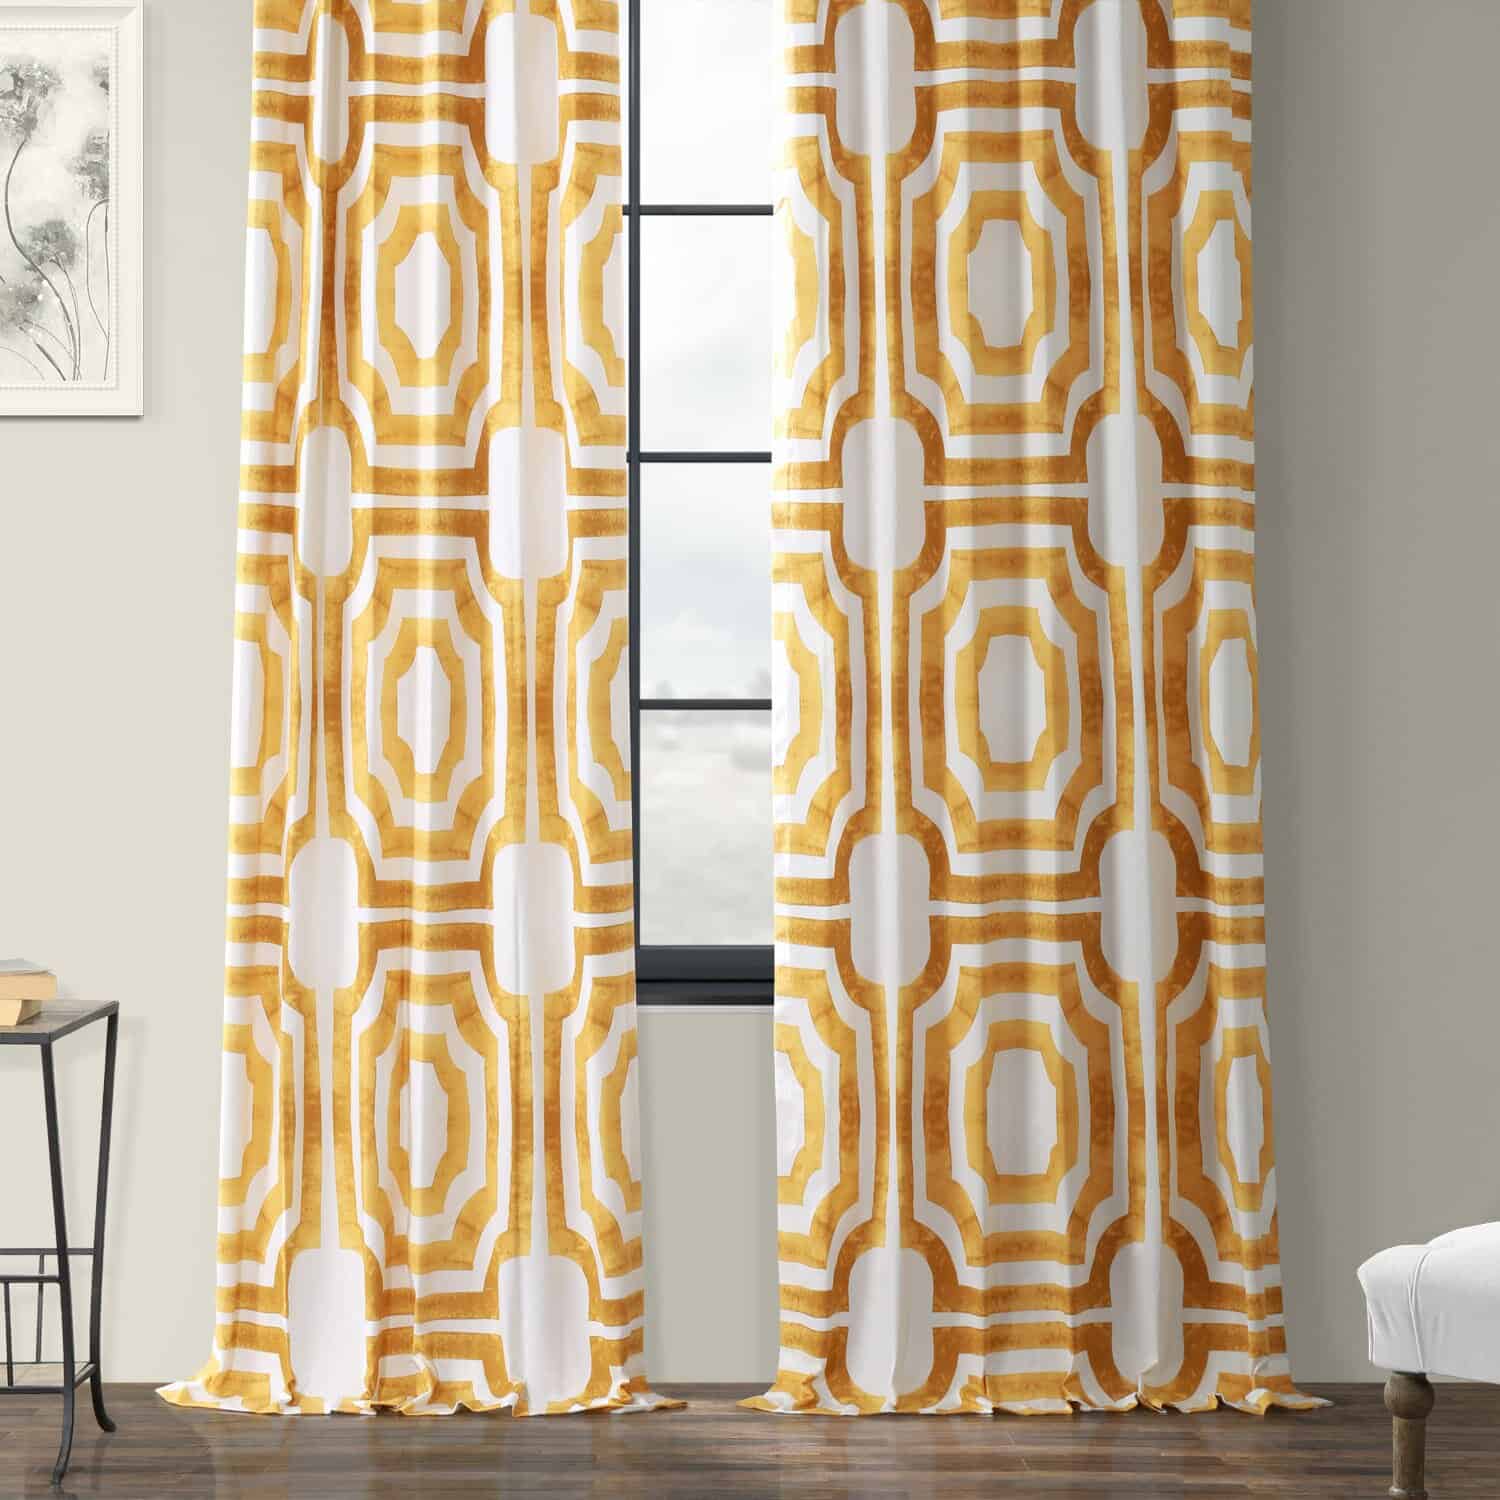 Curtains With A Geometric Pattern Are Super Fun